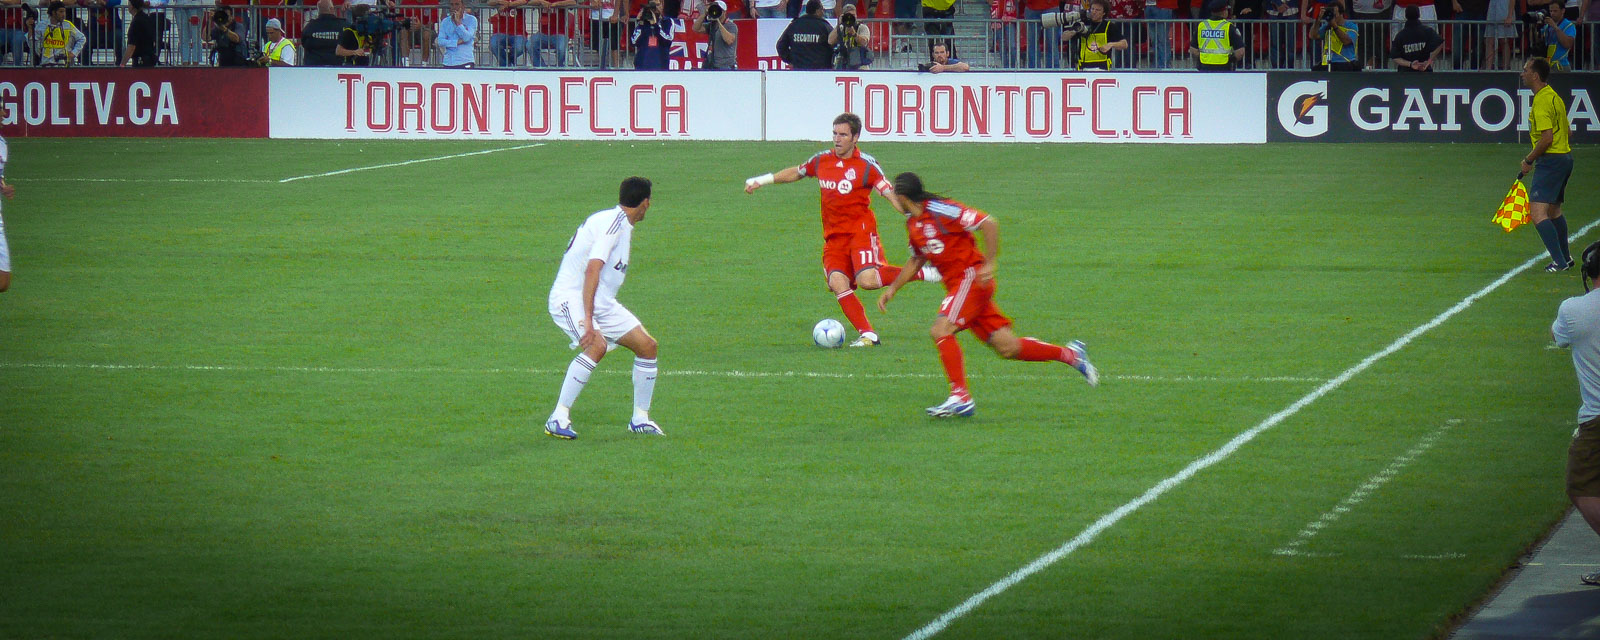 Two soccer players in red and white uniforms in action during a match, with a referee and spectators in the background, at Toronto FC's stadium.